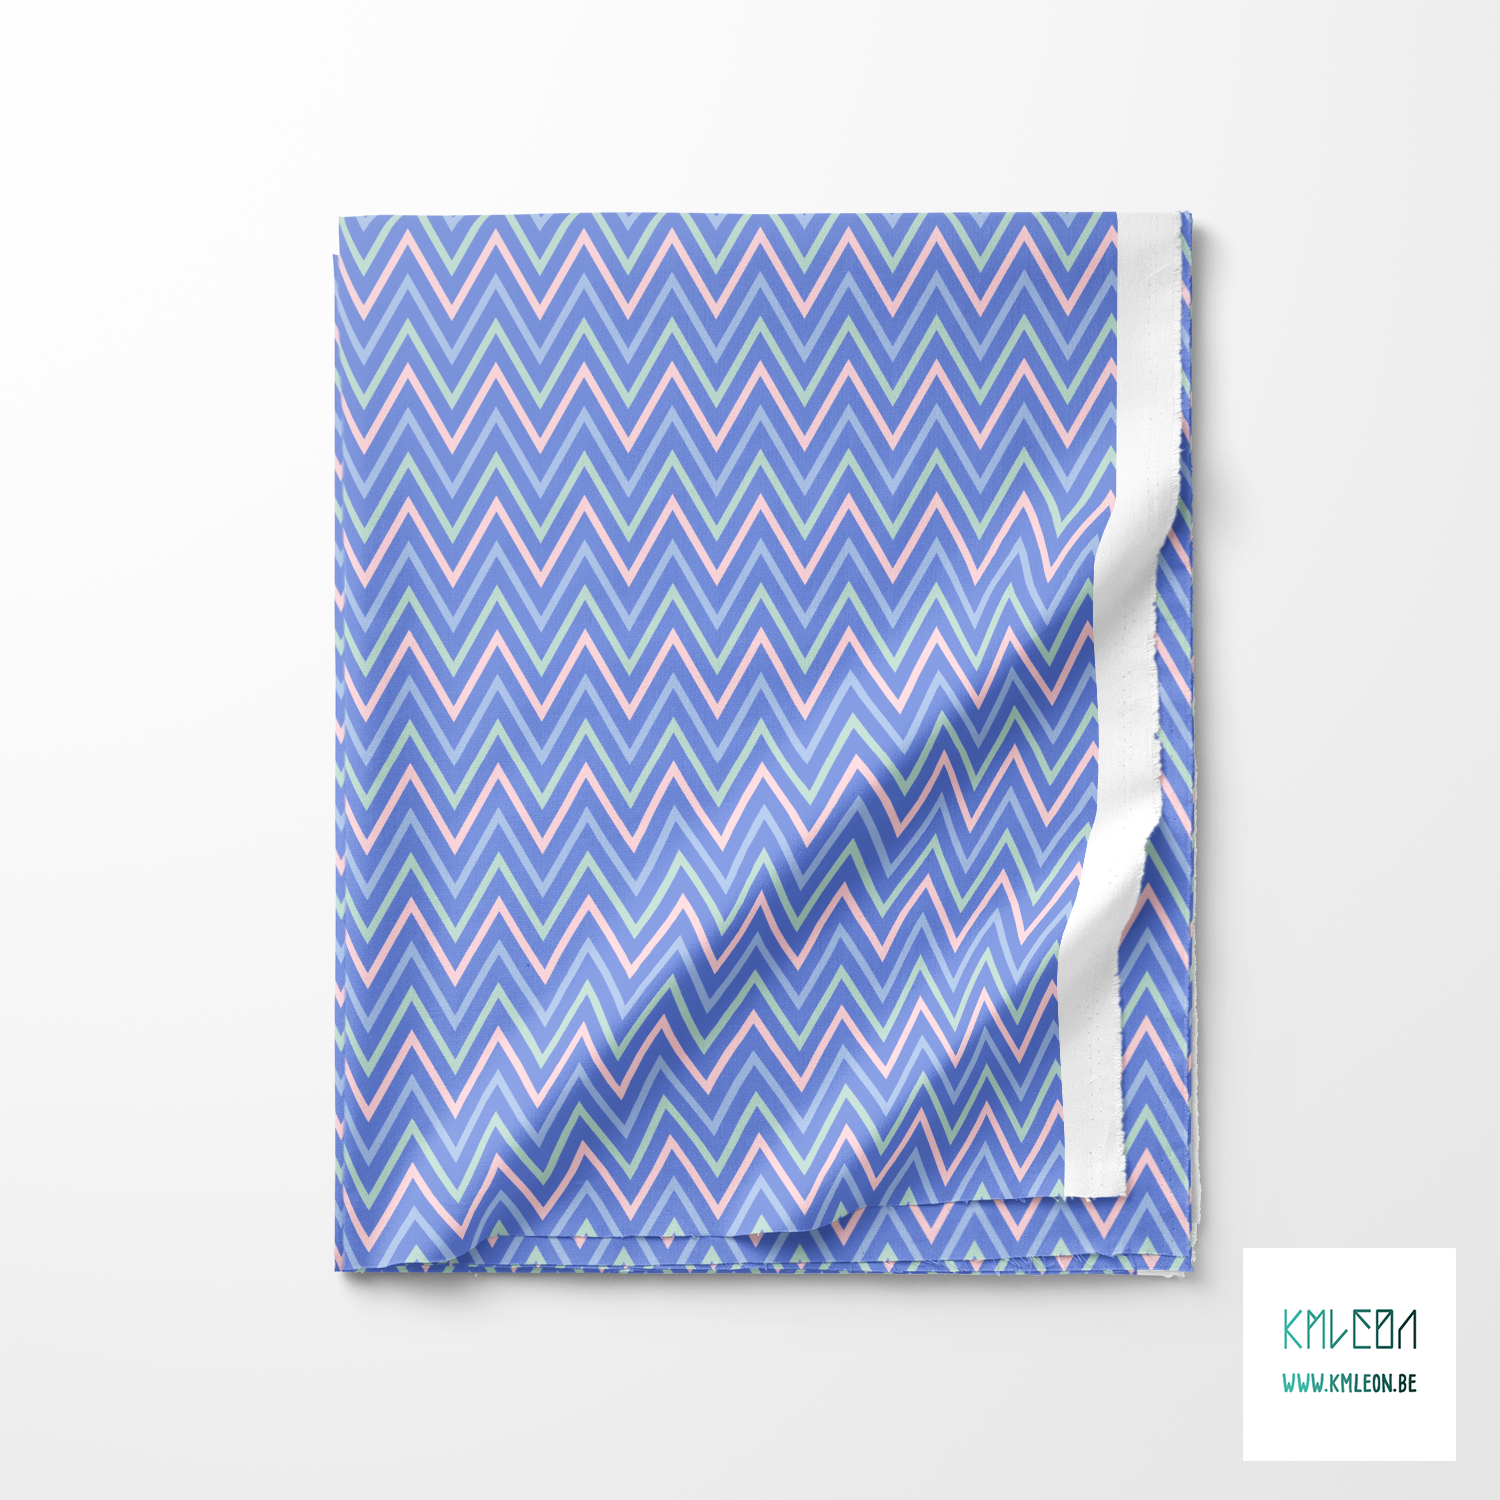 Pink, mint green and periwinkle chevron fabric